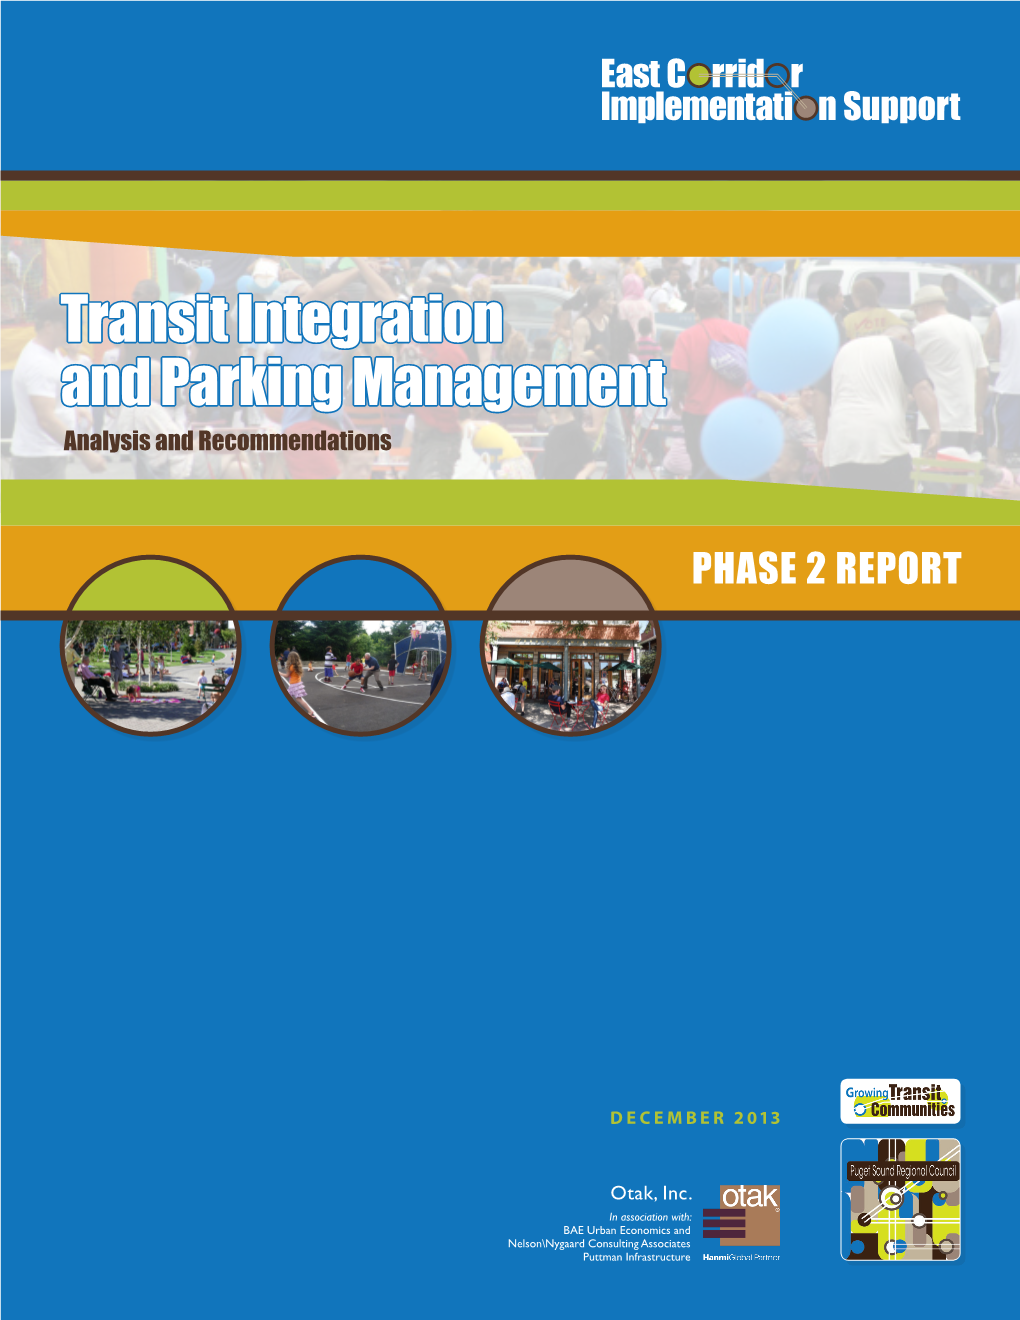 Transit Integration and Parking Management Analysis and Recommendations